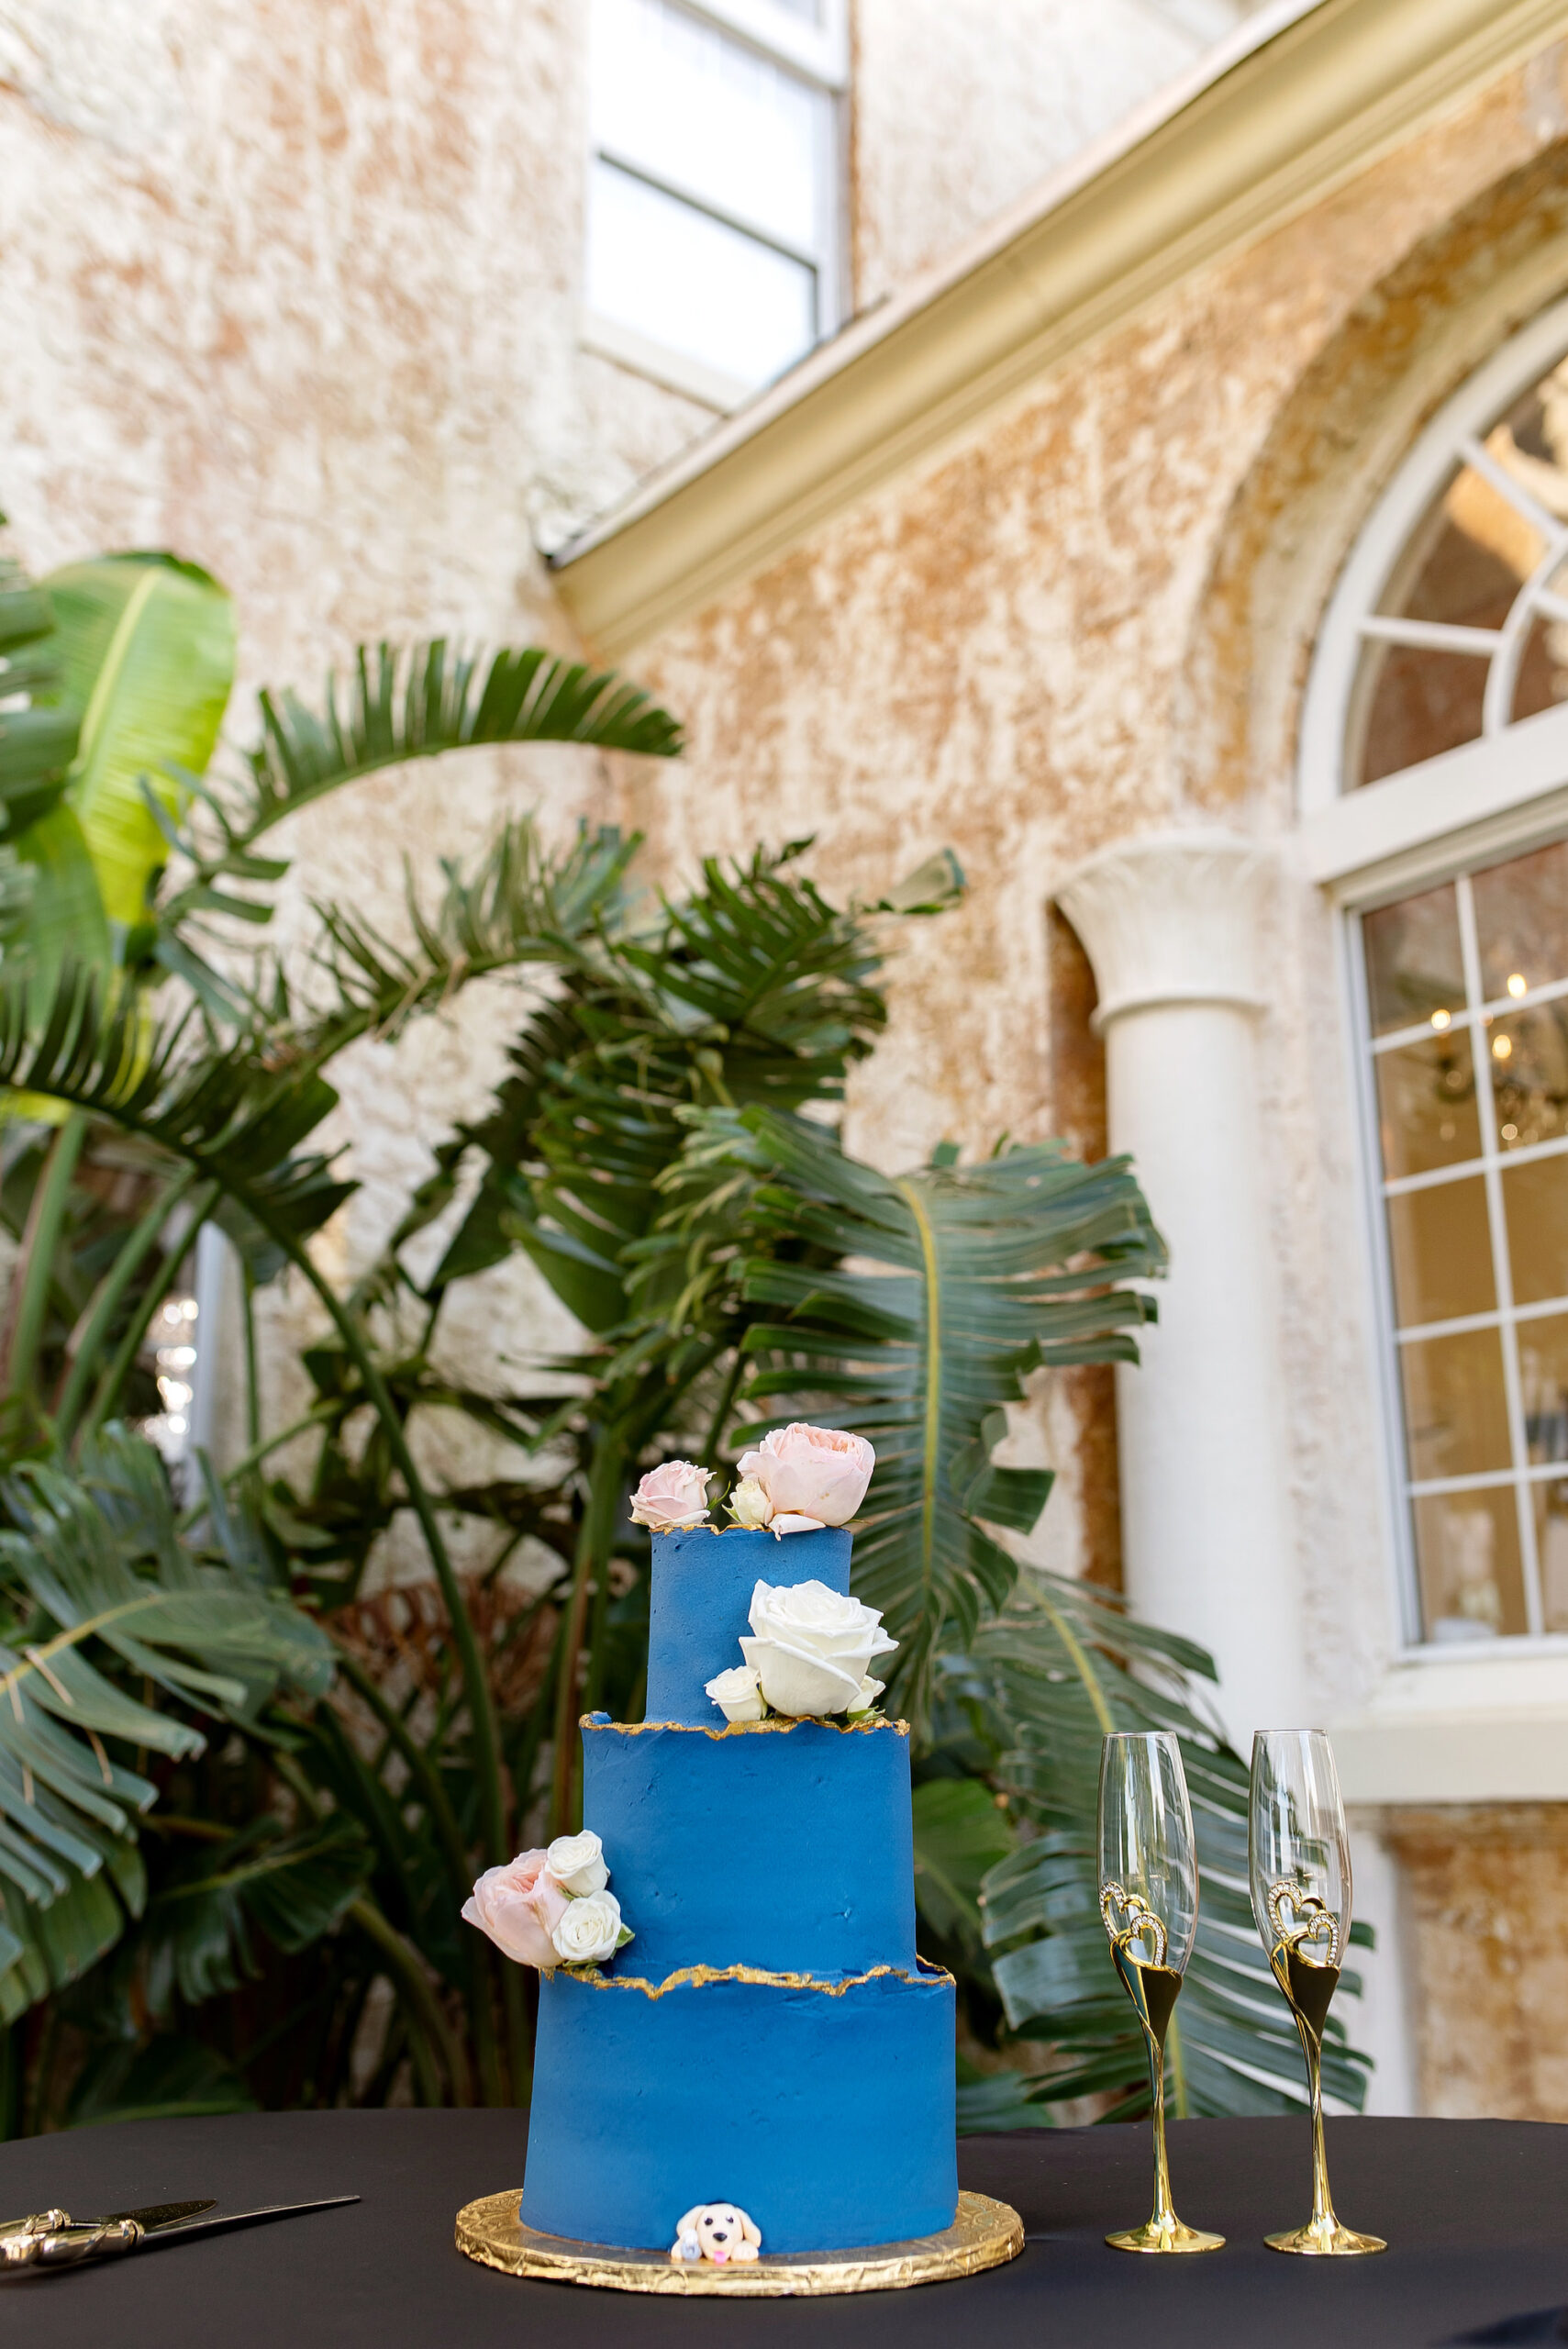 Vibrant Three-tiered Blue and Gold Wedding Cake Inspiration with Pink and White Garden Roses